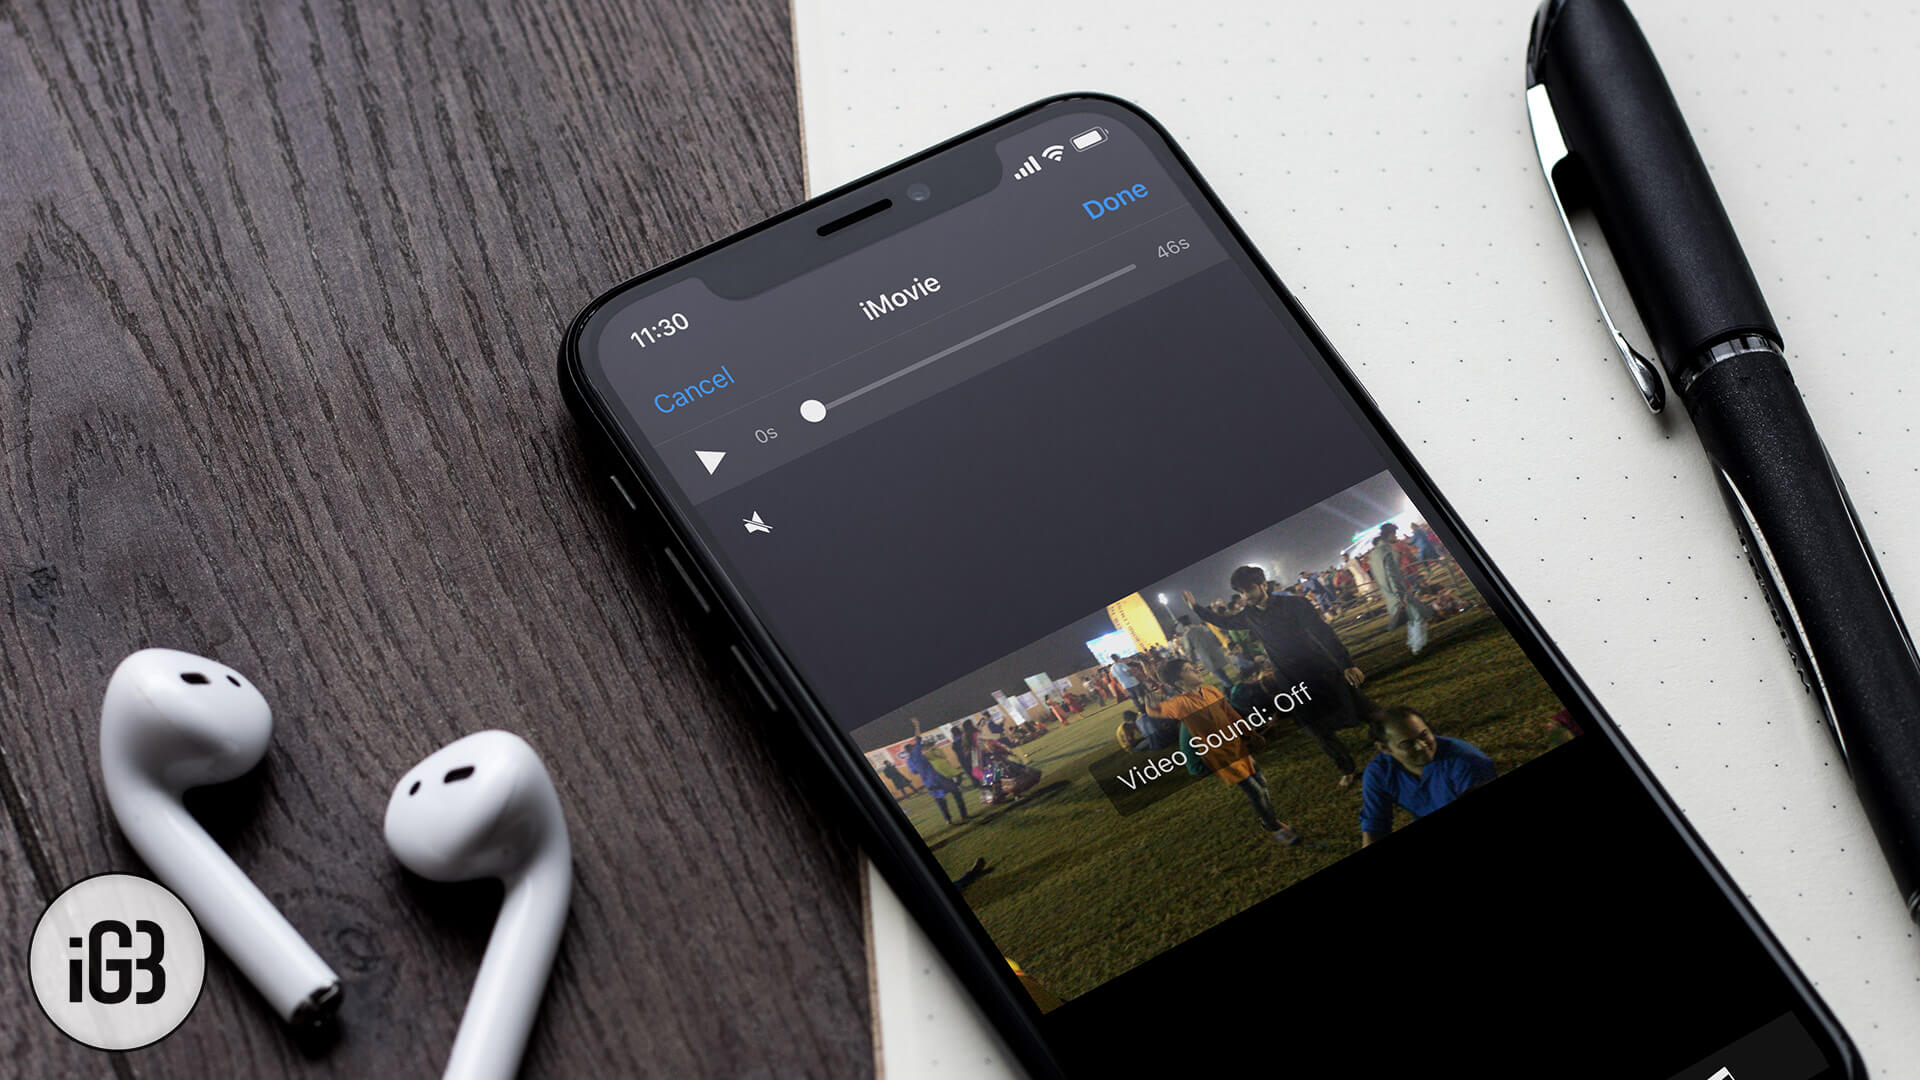 How To Combine Videos on iPhone